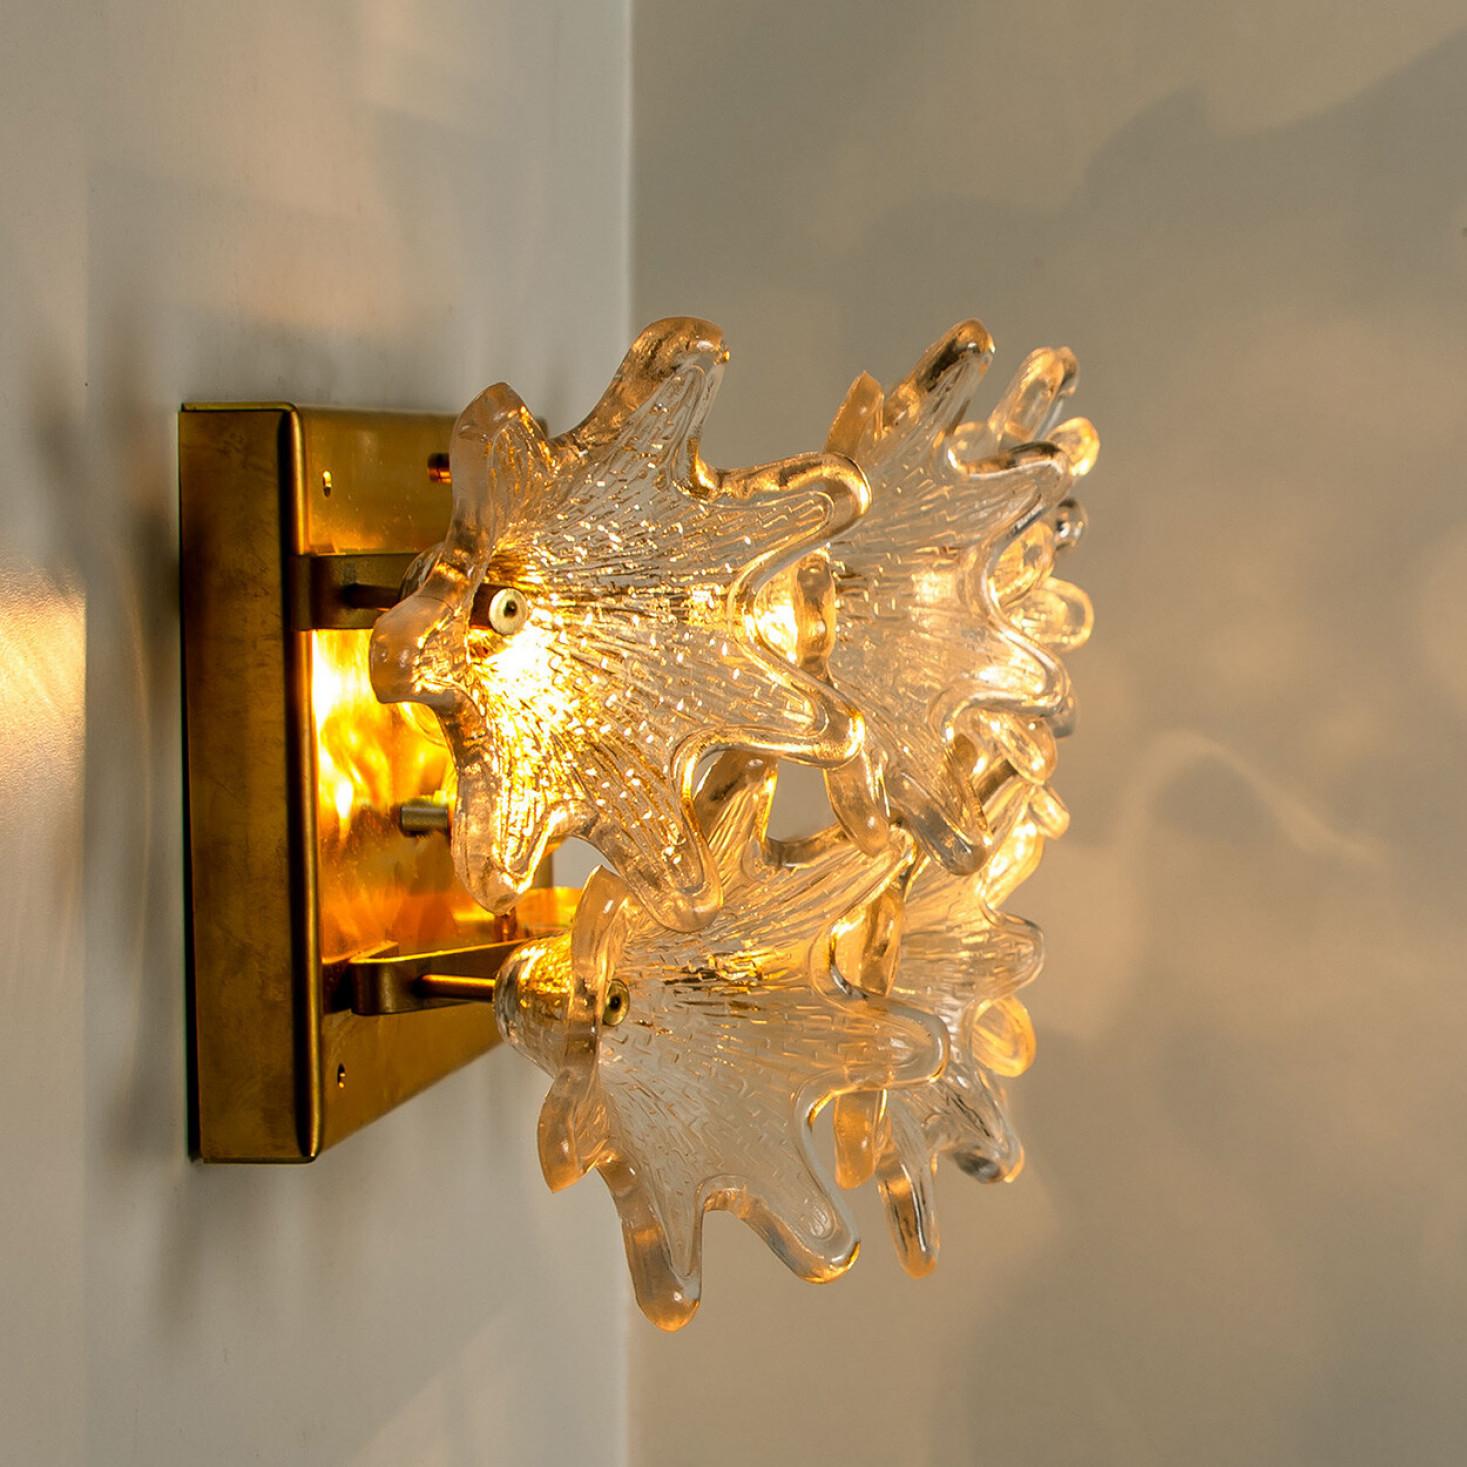 1 of 3 Pairs Large Brass Gold Murano Glass Wall Lights by Paolo Venini for VeArt In Good Condition For Sale In Rijssen, NL